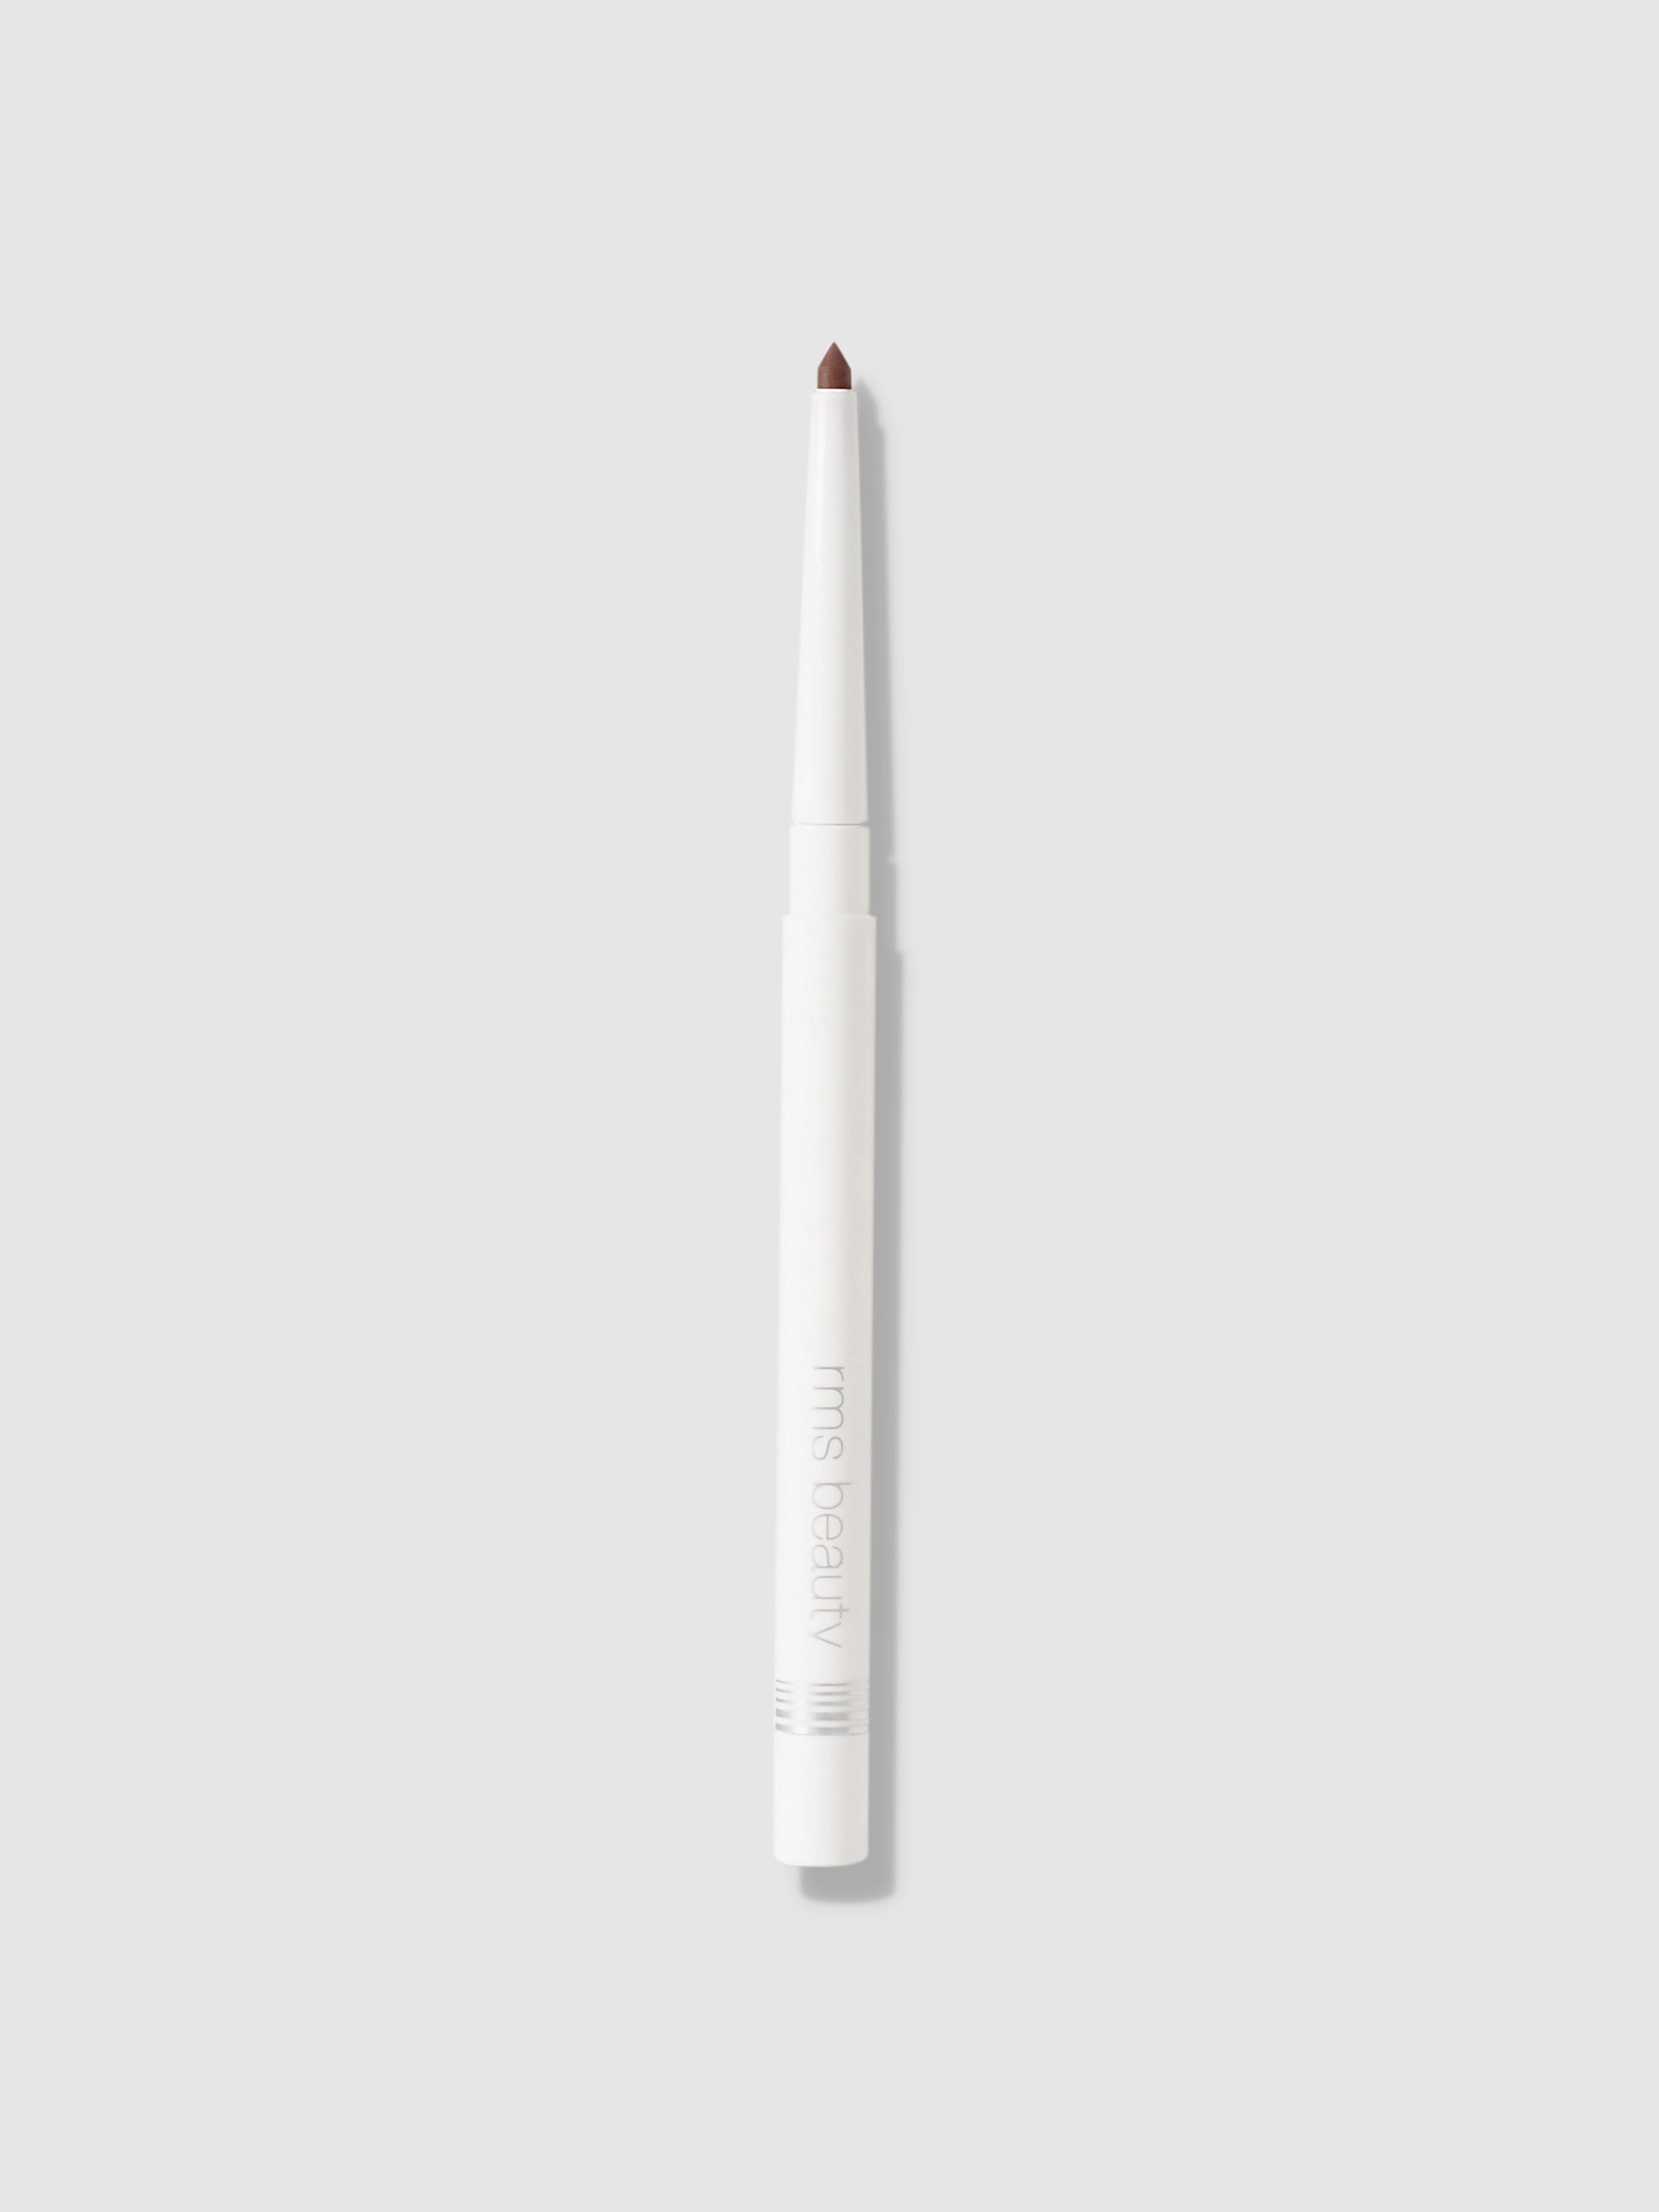 Rms Beauty Lip Liner In Nighttime Nude